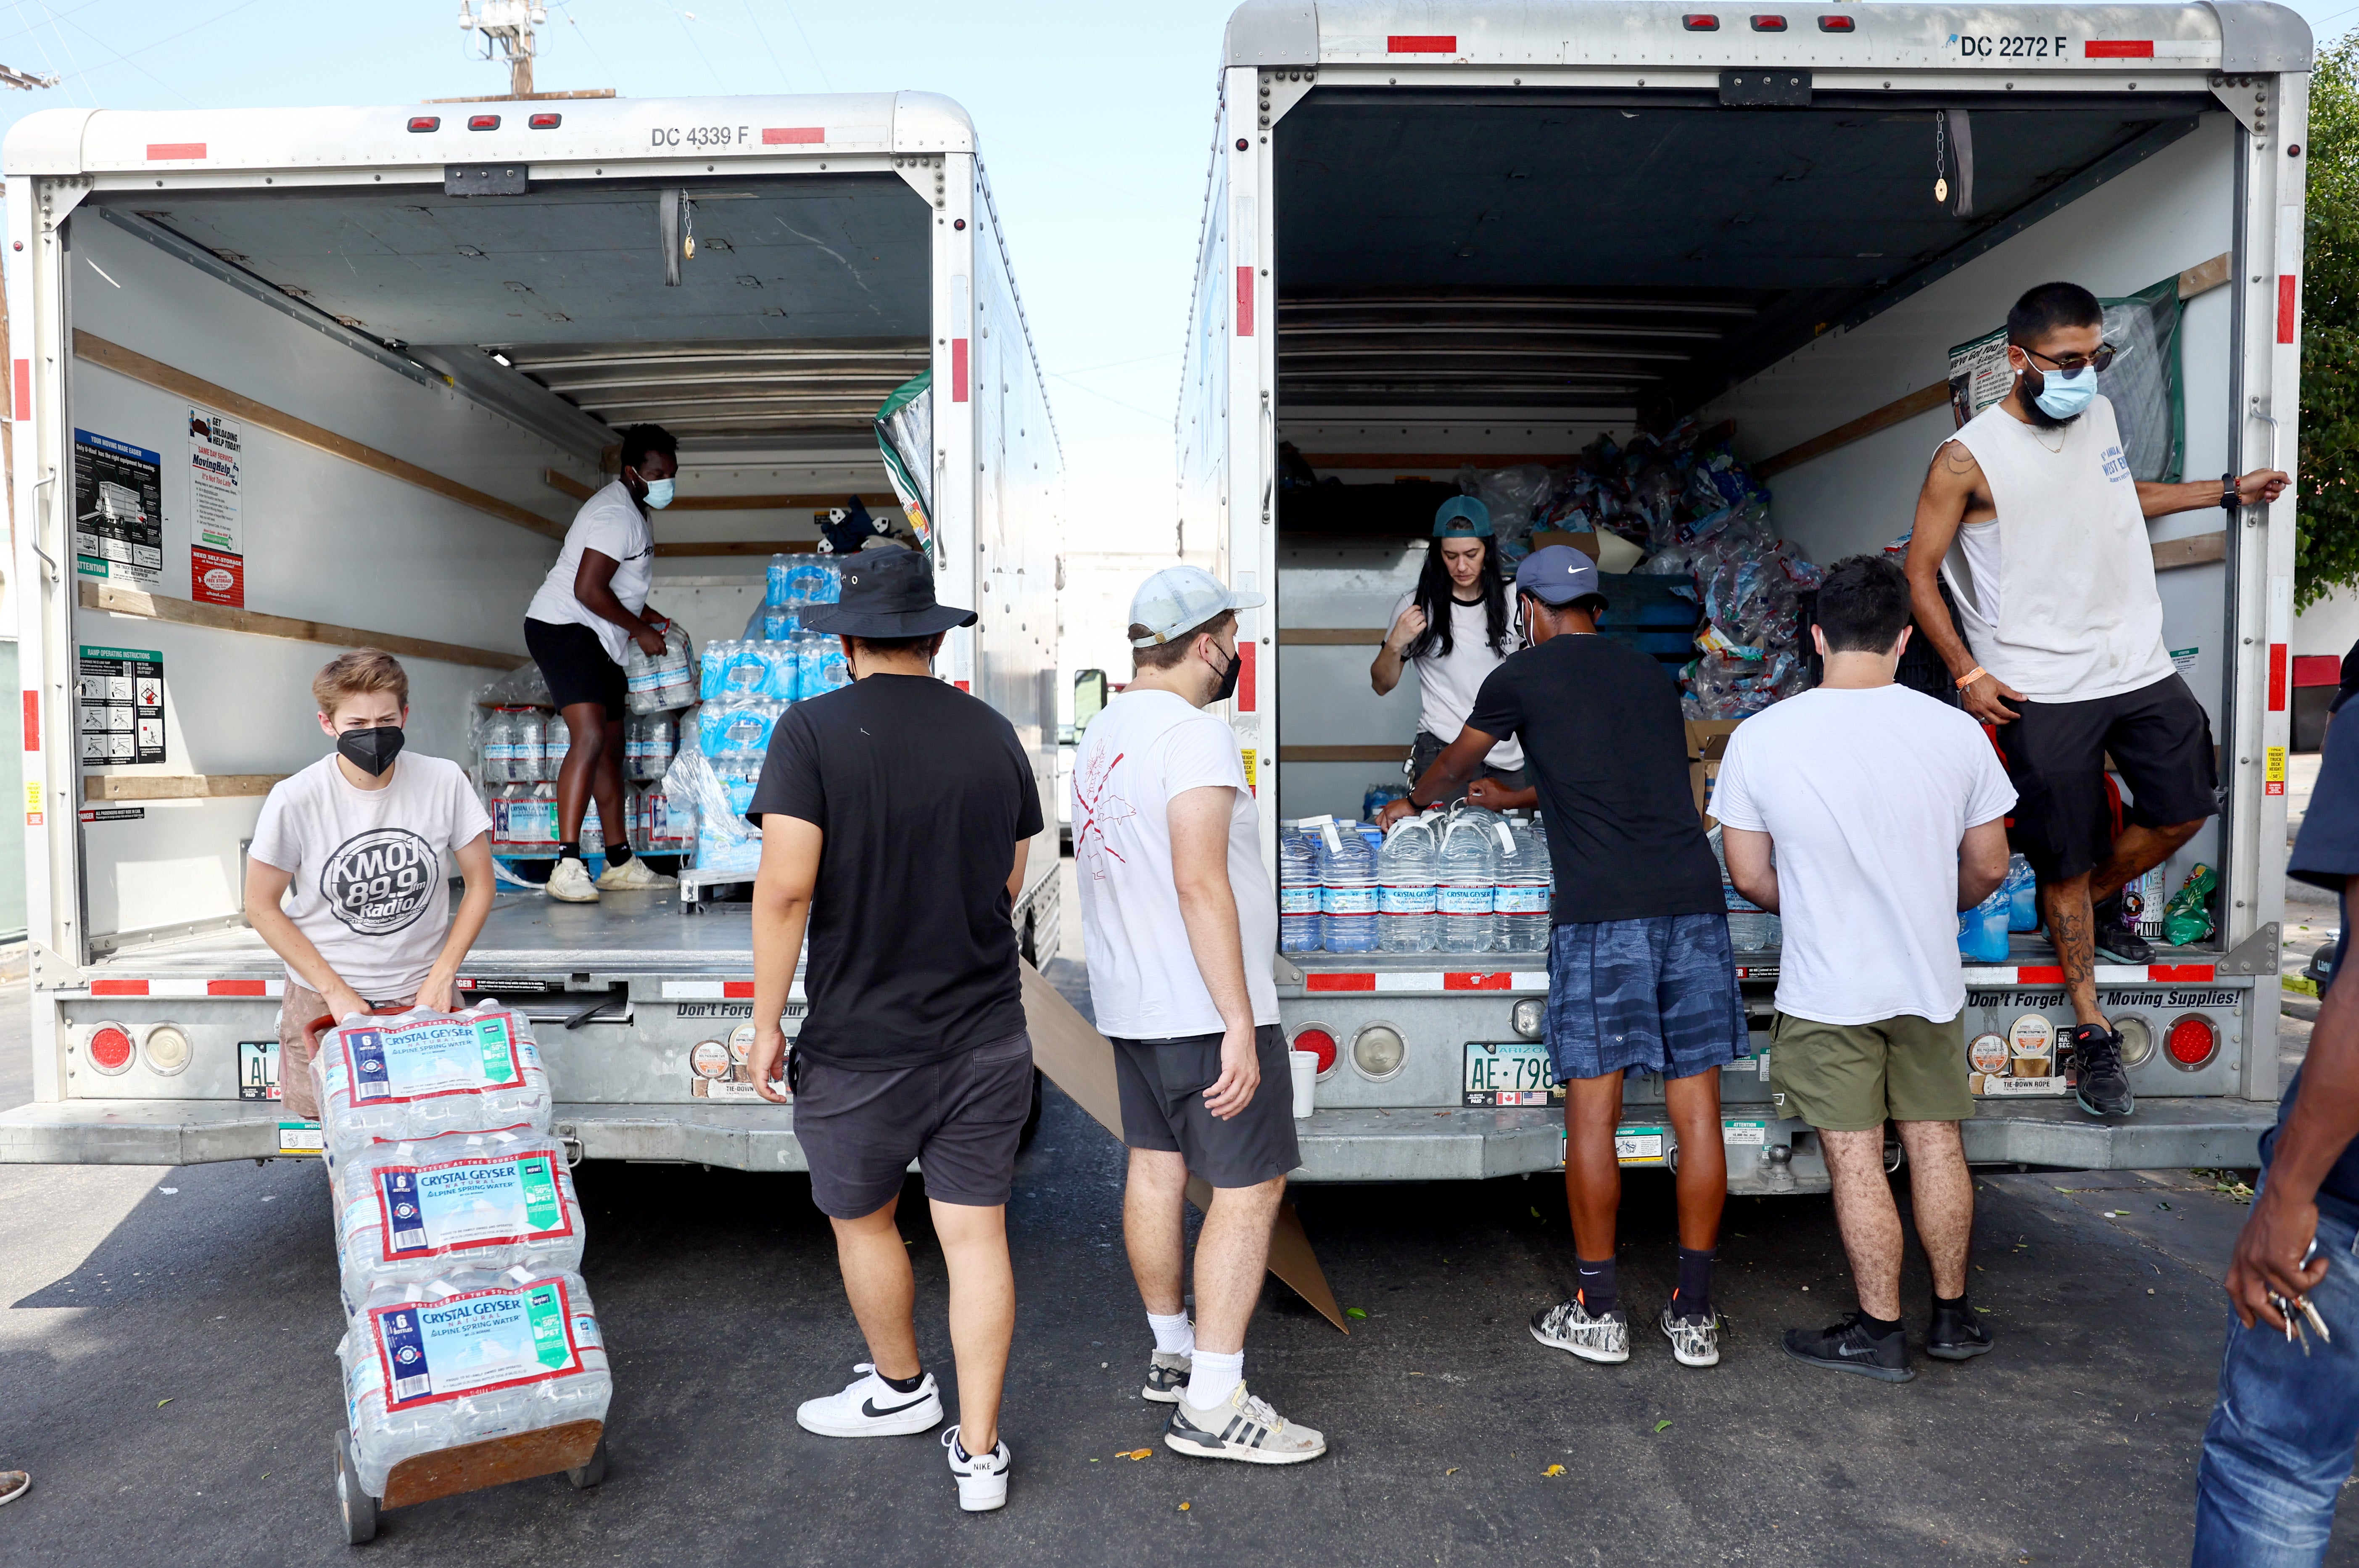 Volunteers with Water Drop LA prepare to deliver water and other items to members of the Skid Row community on September 4, 2022 in Los Angeles, California. (Photo: Mario Tama, Getty Images)